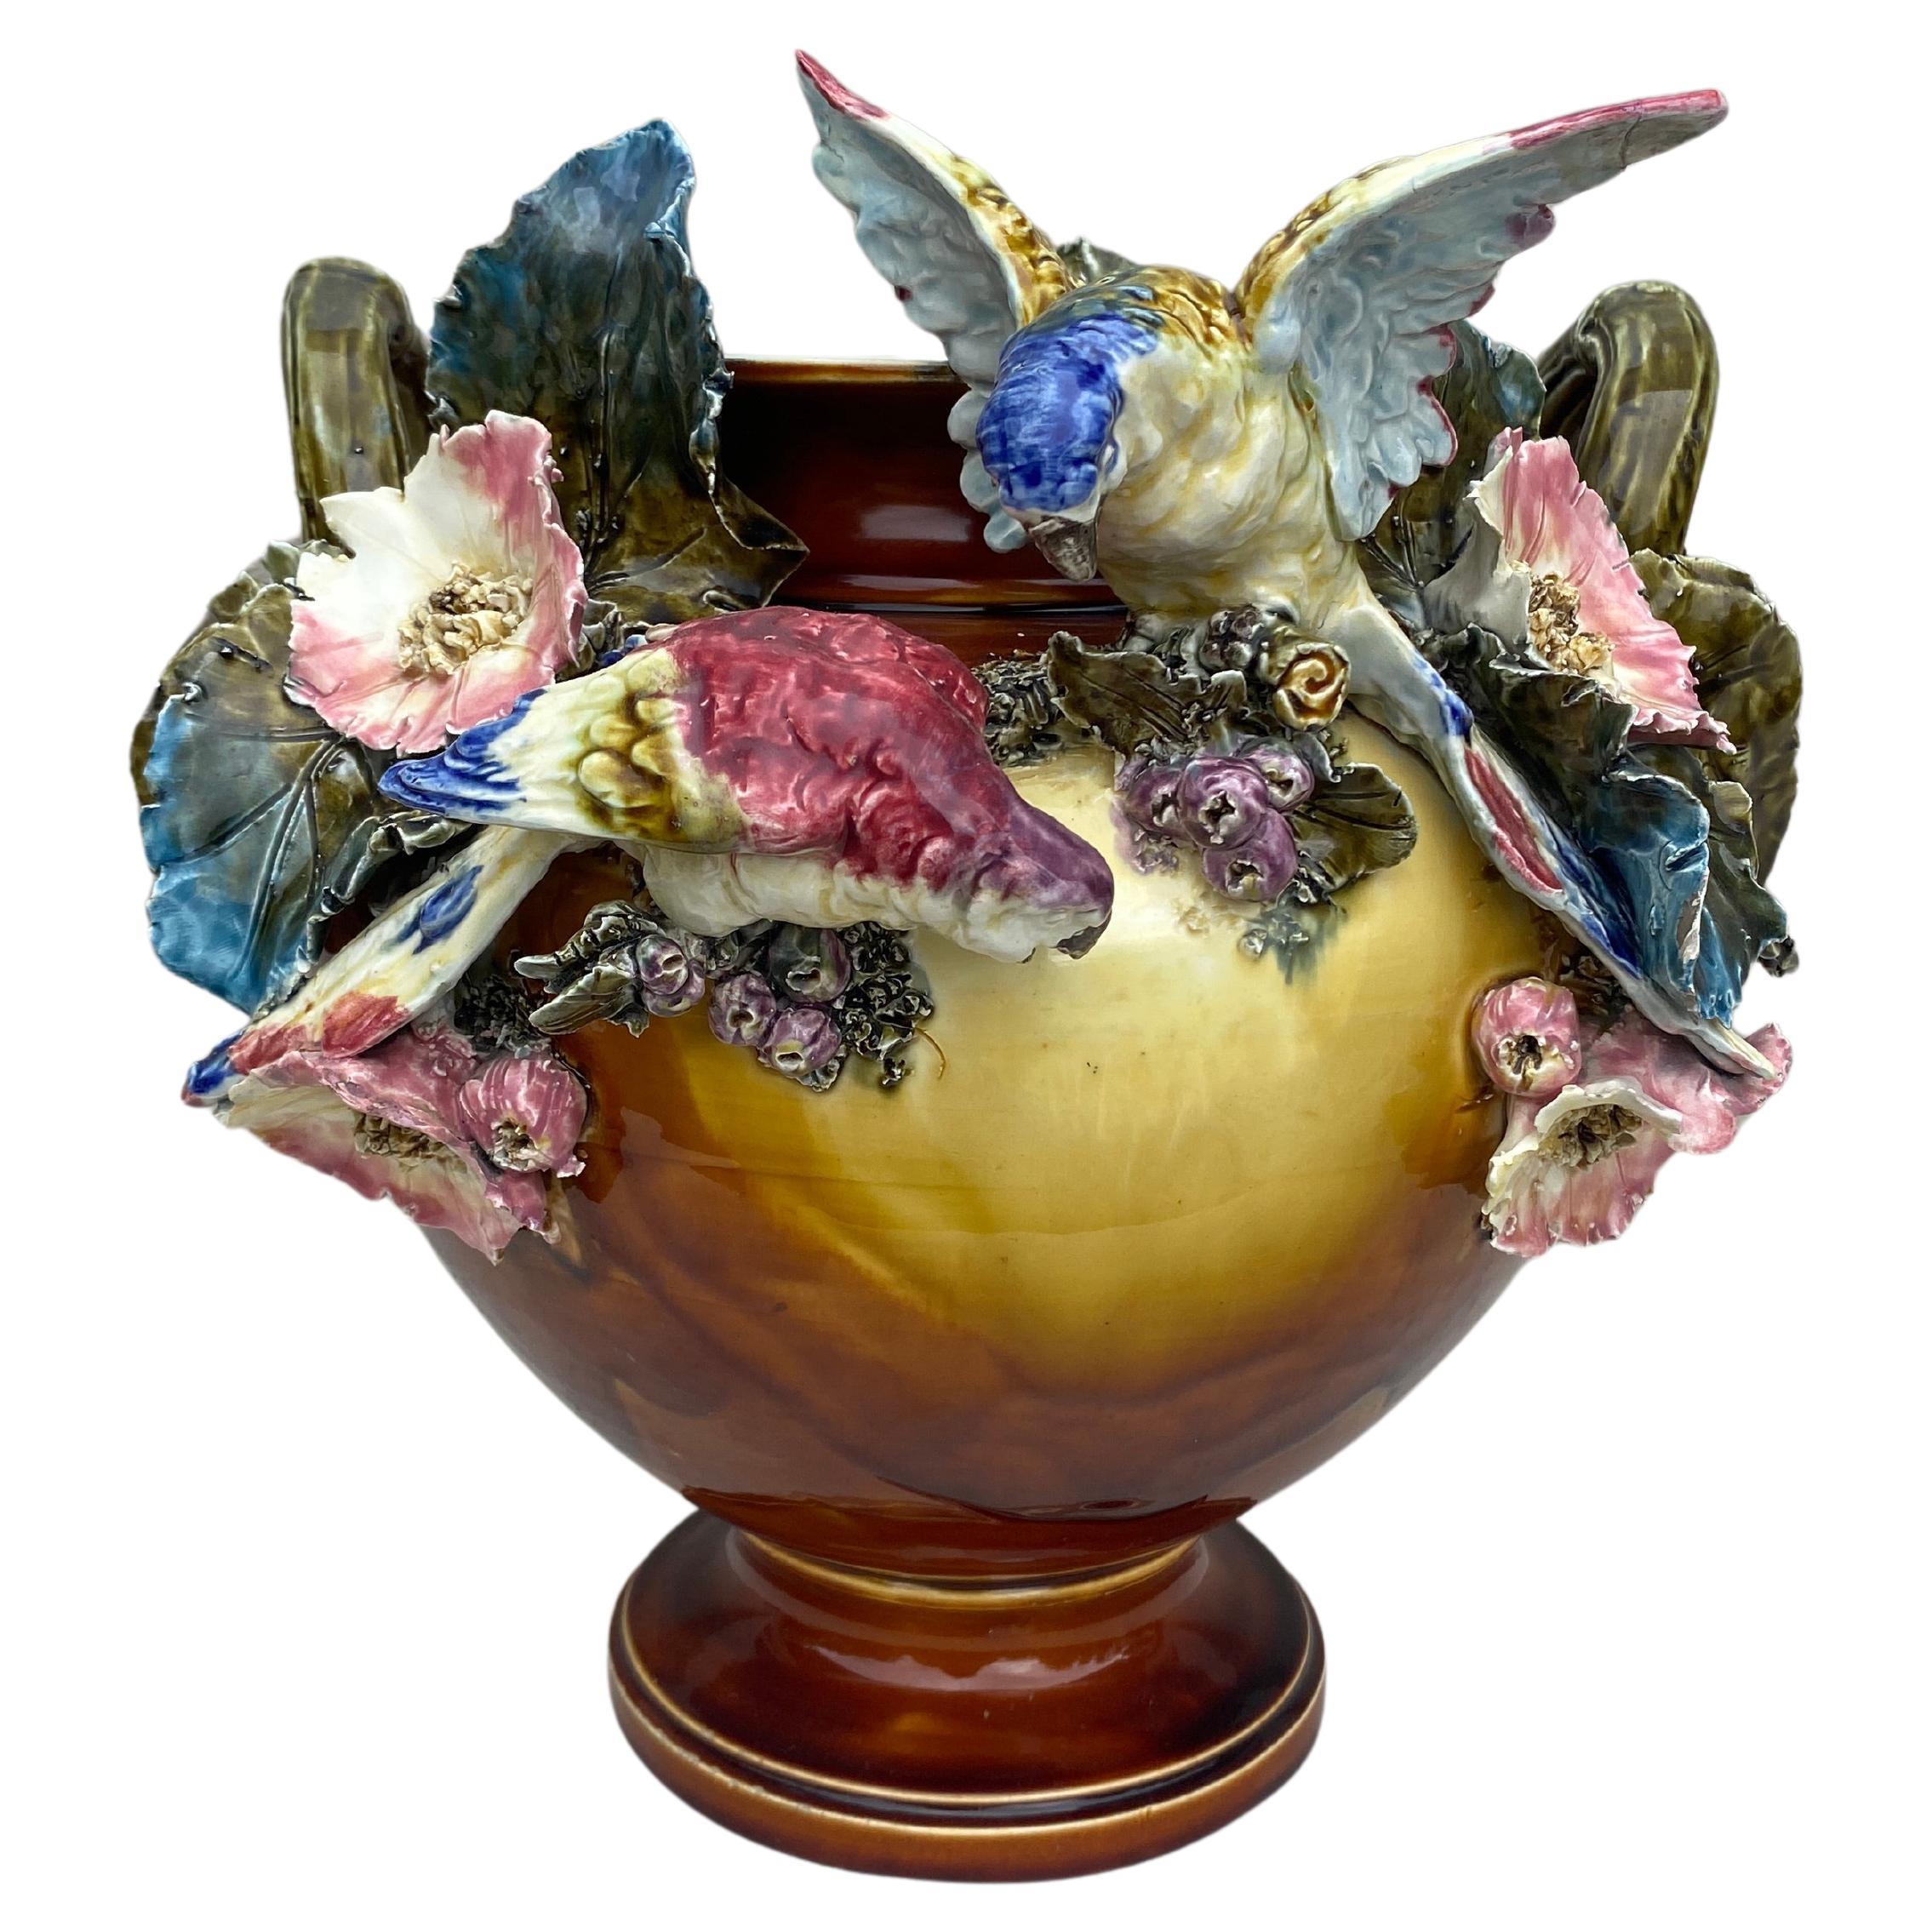 19th Century Large Austrian Parrots & Flowers Cache Pot.
Height / 12 inches.
Diameter / 12 inches.